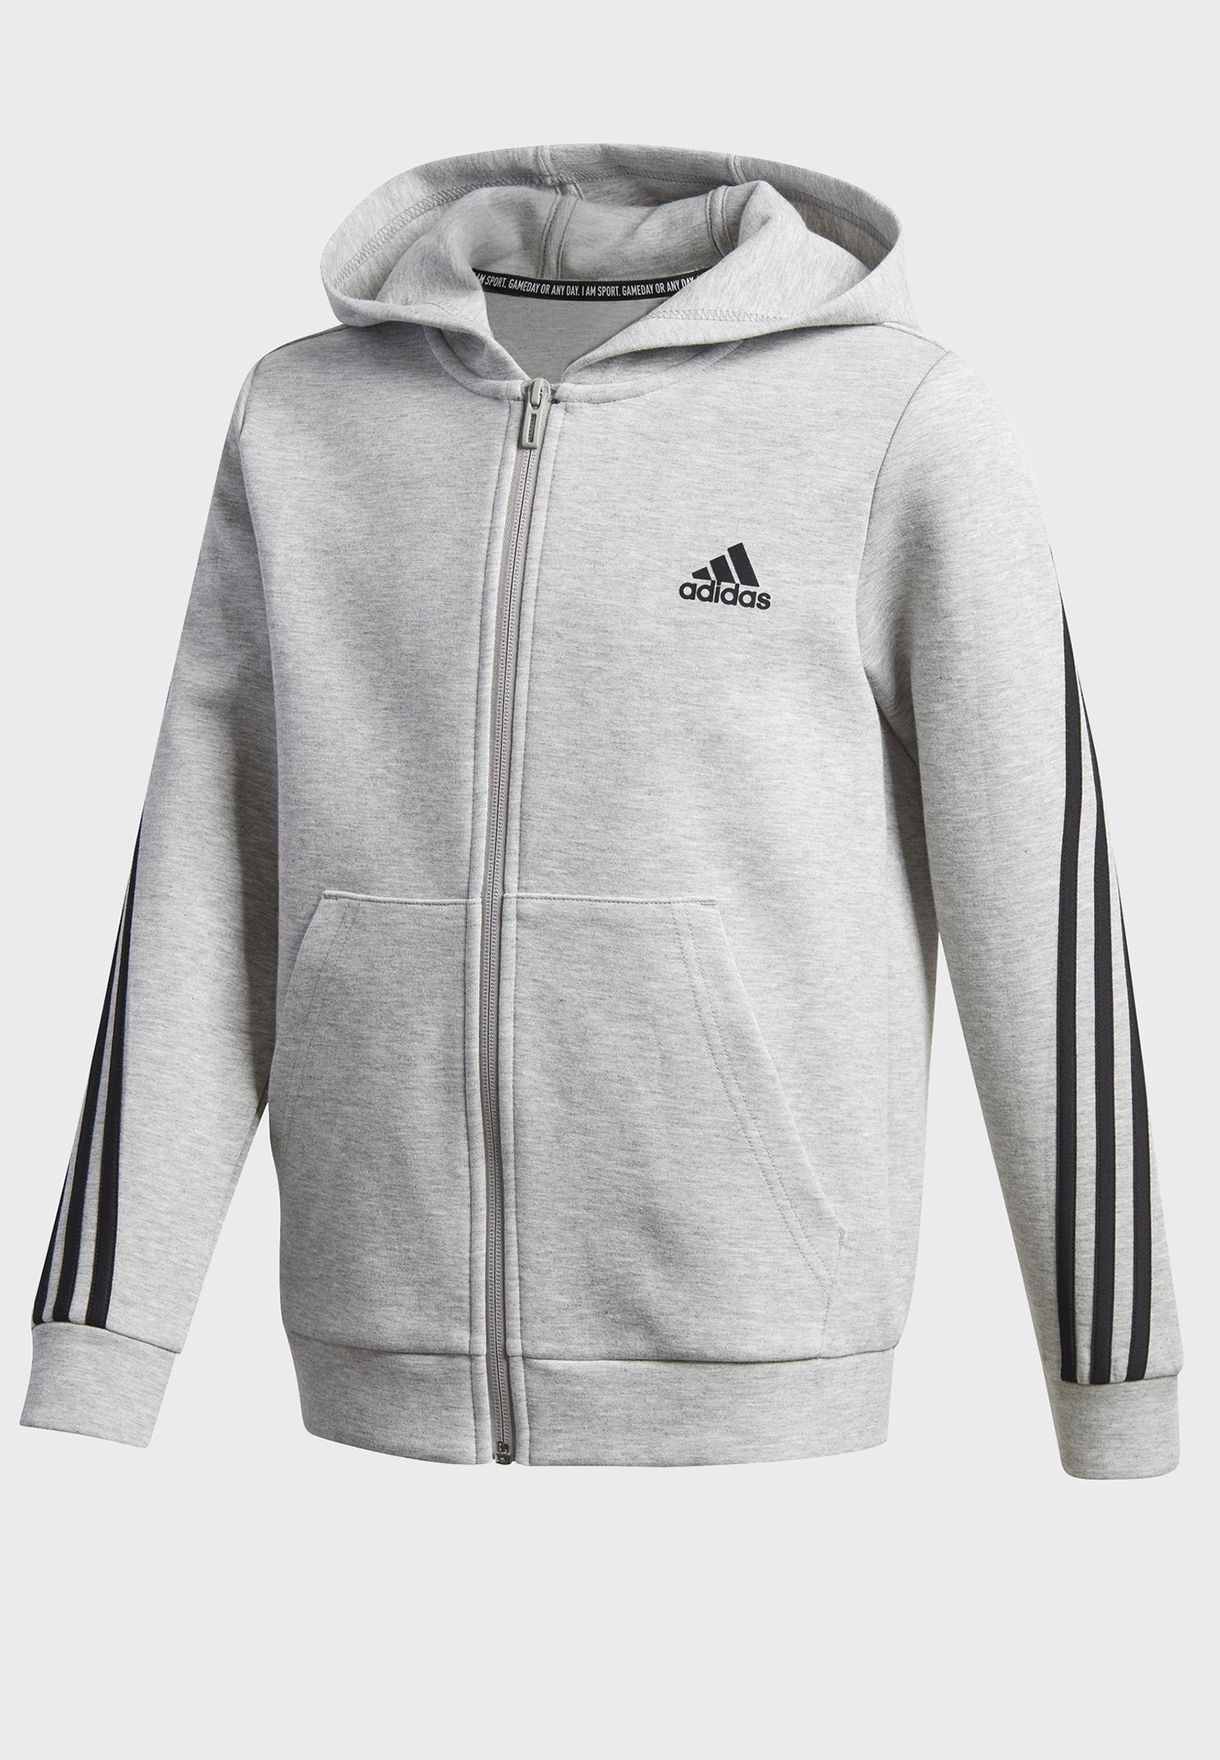 adidas i am sport gameday or any day hoodie